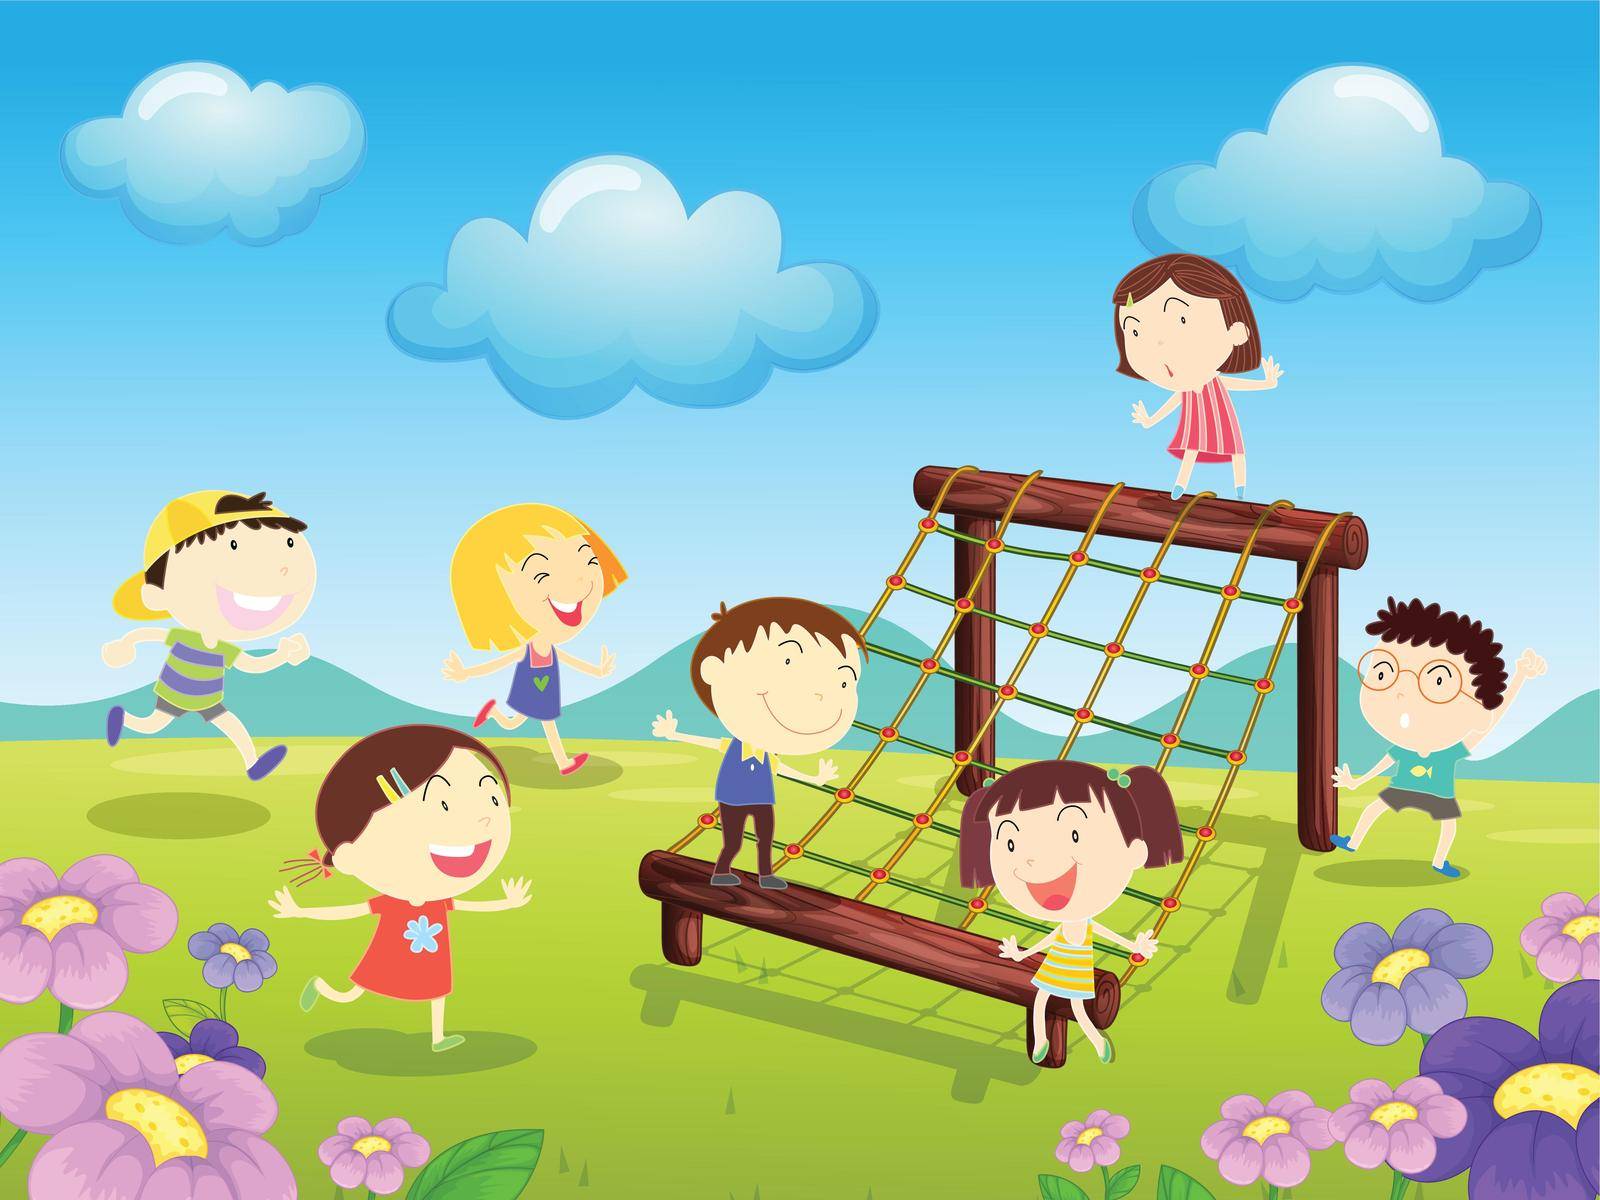 Illustration of kids playing at the park